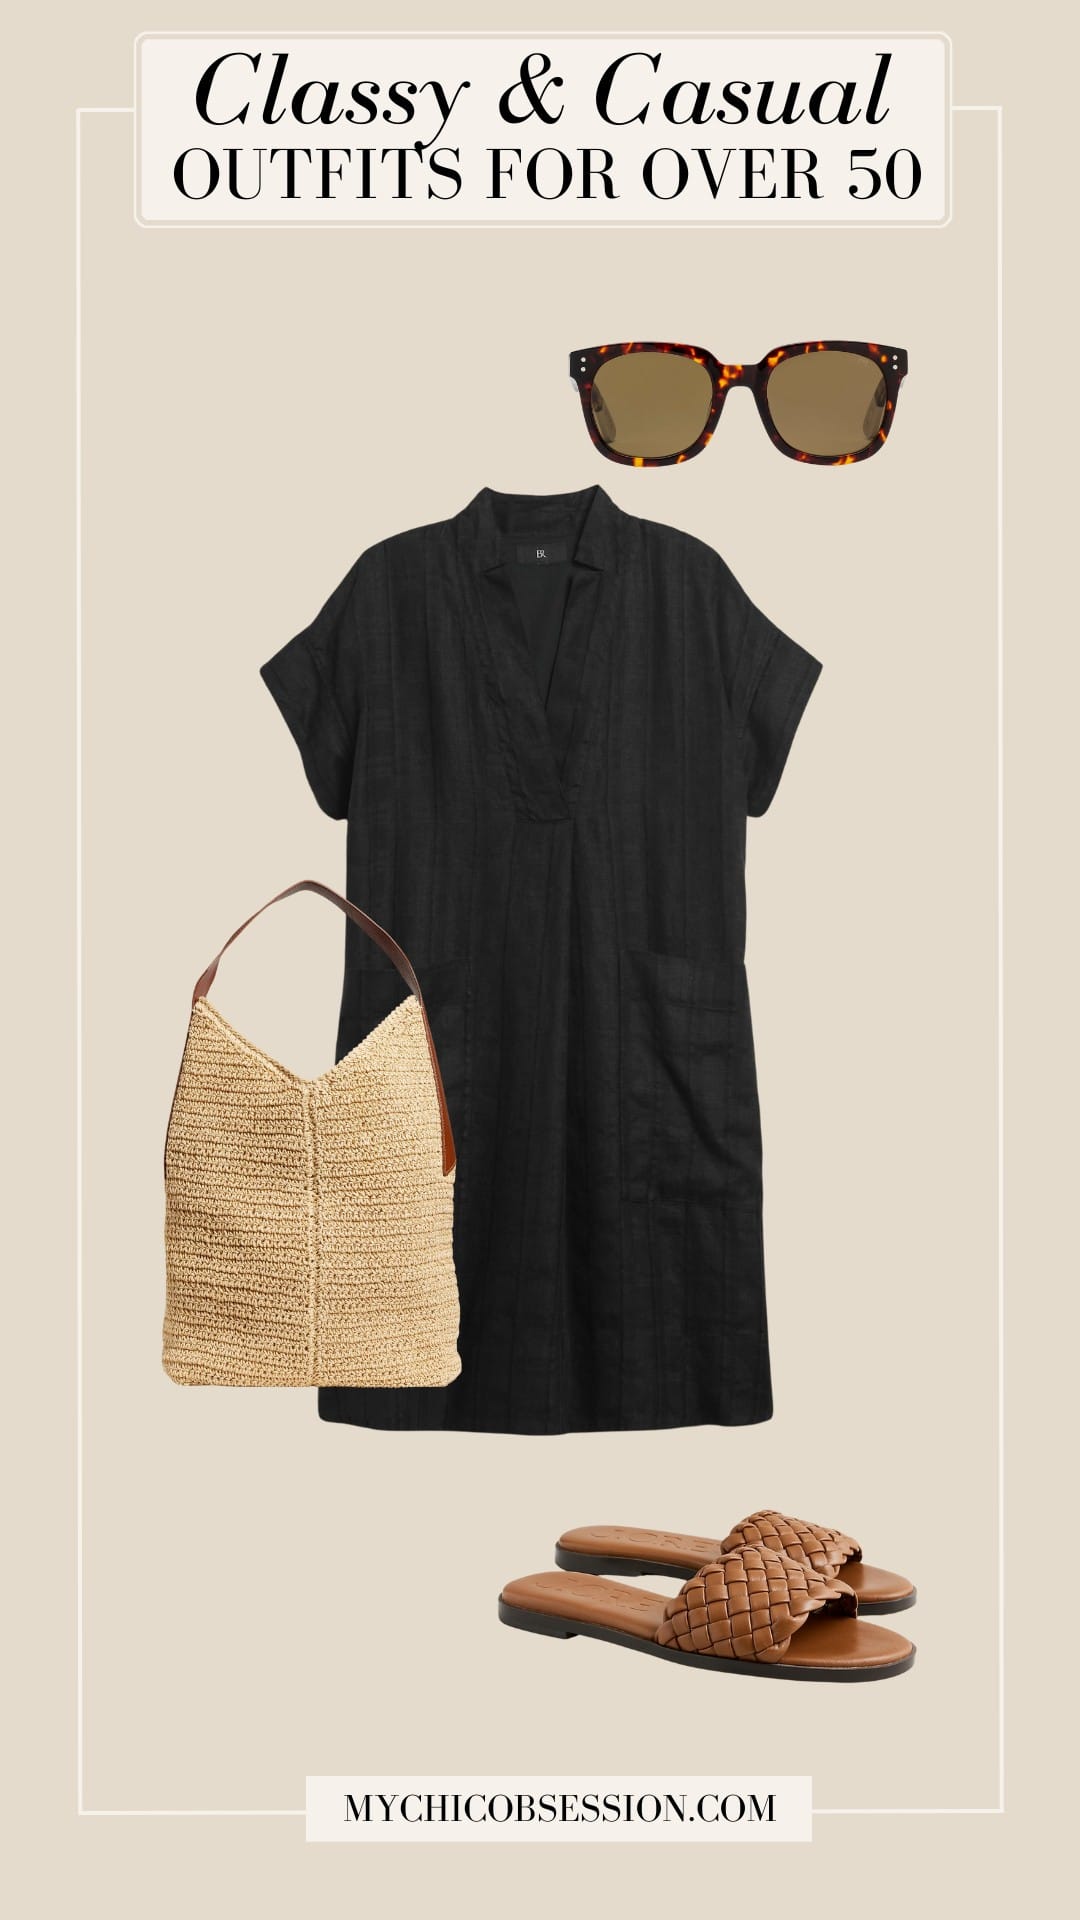 classy casual outfit for ladies over 50 - linen shirtdress sunglasses straw tote